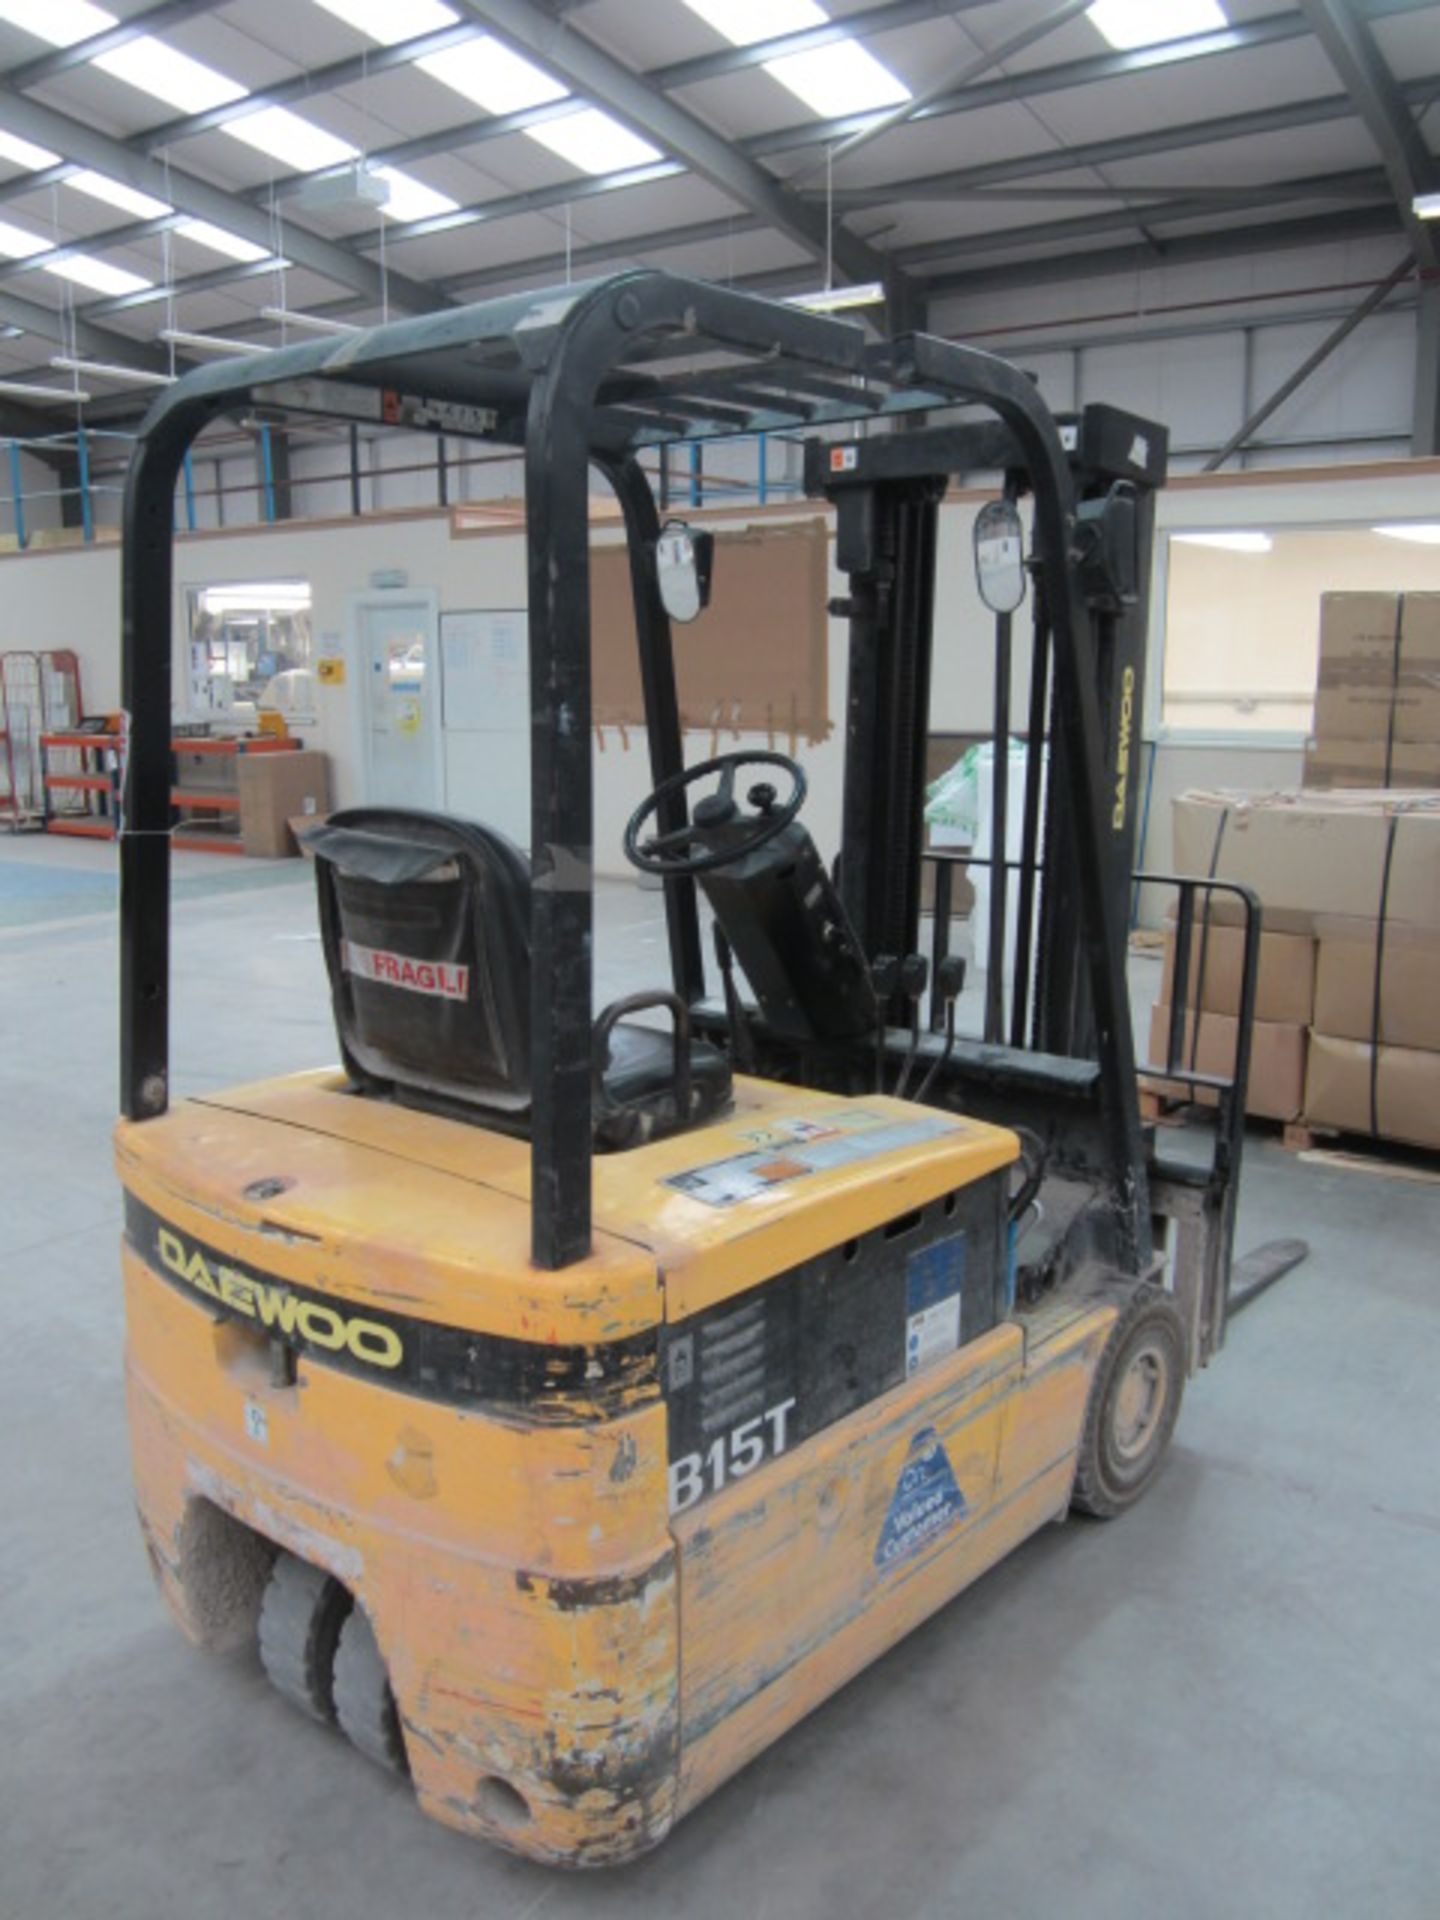 Daewoo B15T-2 ride on battery operated 3-Wheel forklift truck, serial no: CG-00134 (2000). run hours - Image 2 of 12